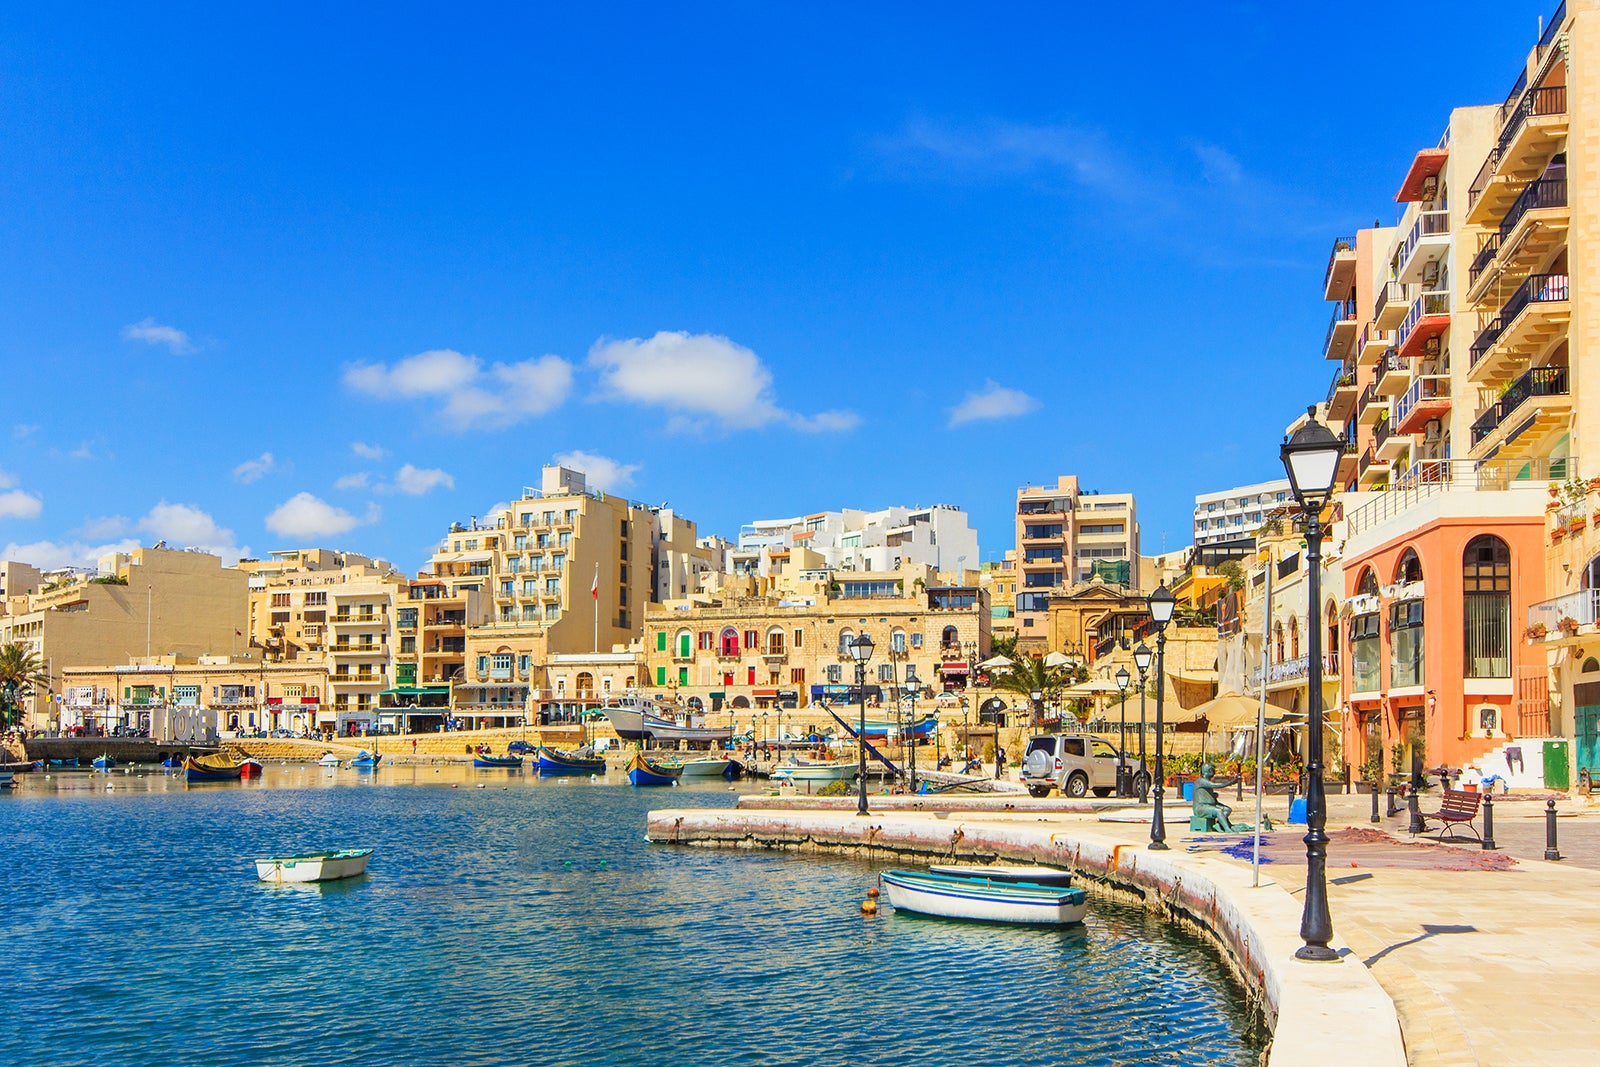 Malta has The best living environment in Europe